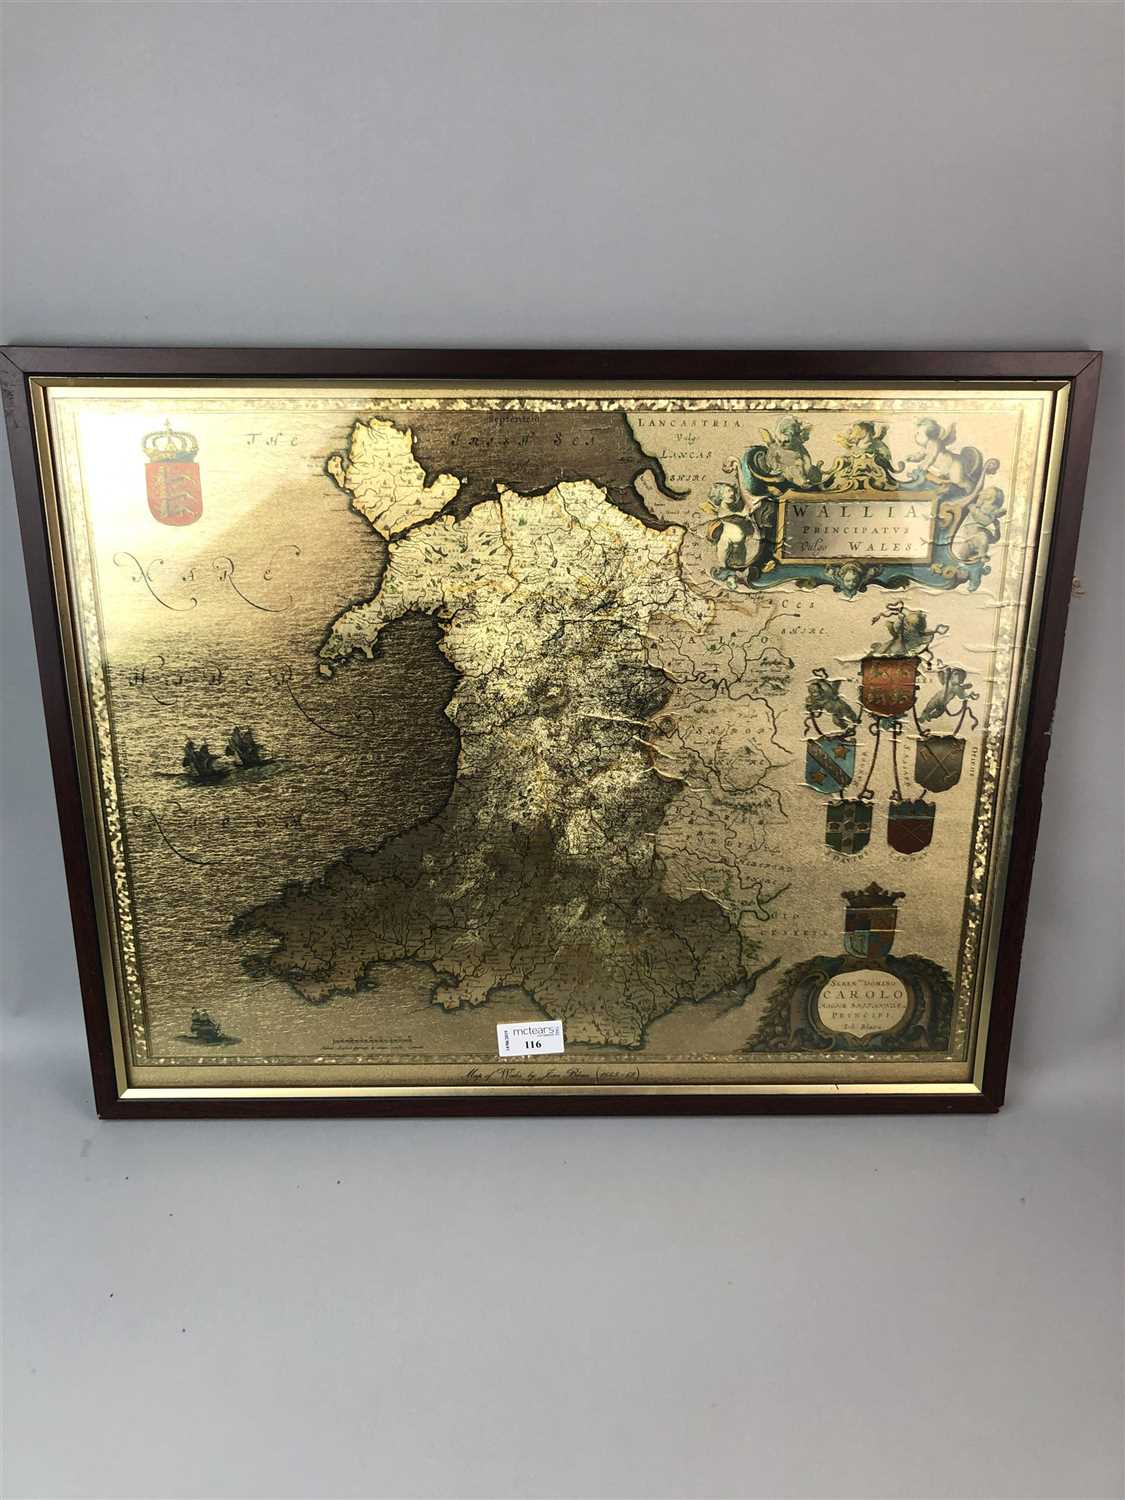 Lot 116 - A REPRODUCTION SHIPS' STYLE TIMEPIECE, MAP OF WALES AND A EMBOSSED COPPER PANEL